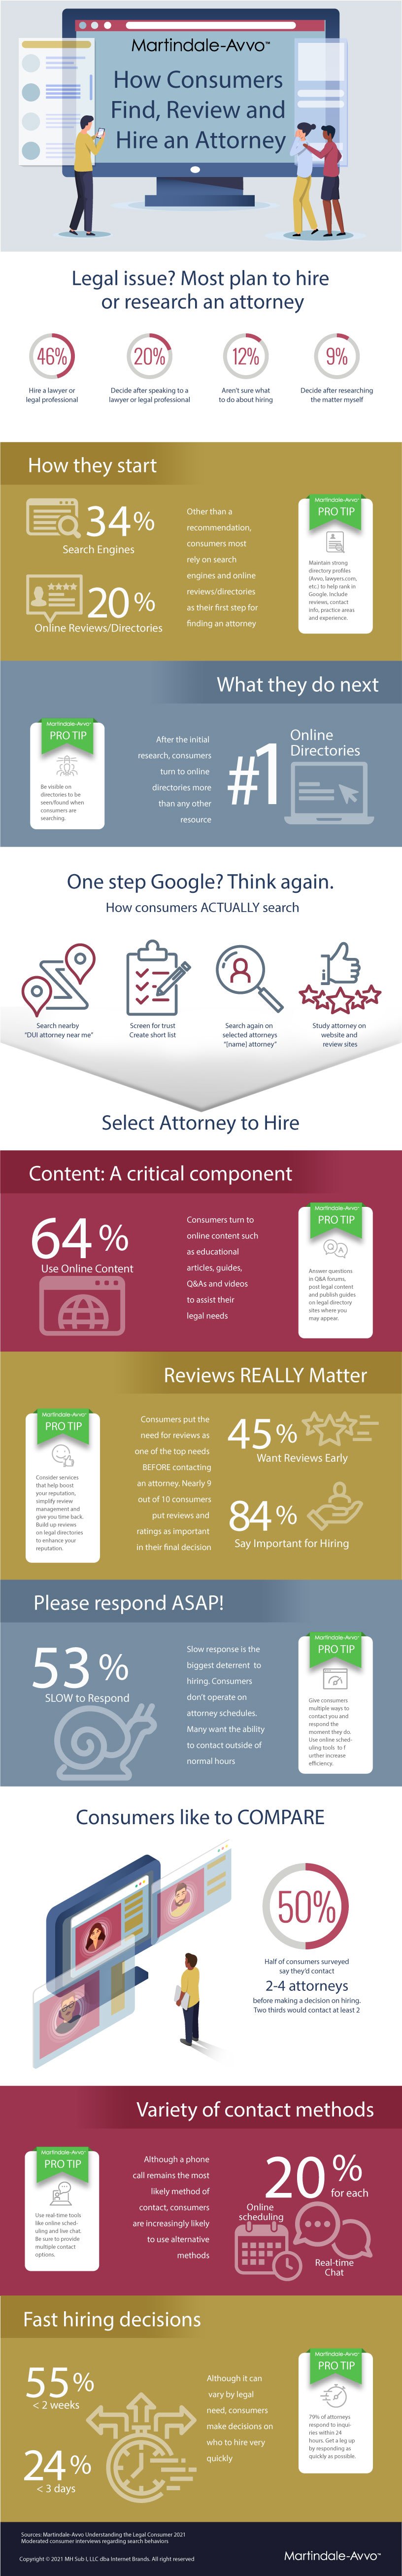 M-A Infographic - How Consumers Find and Choose an Attorney